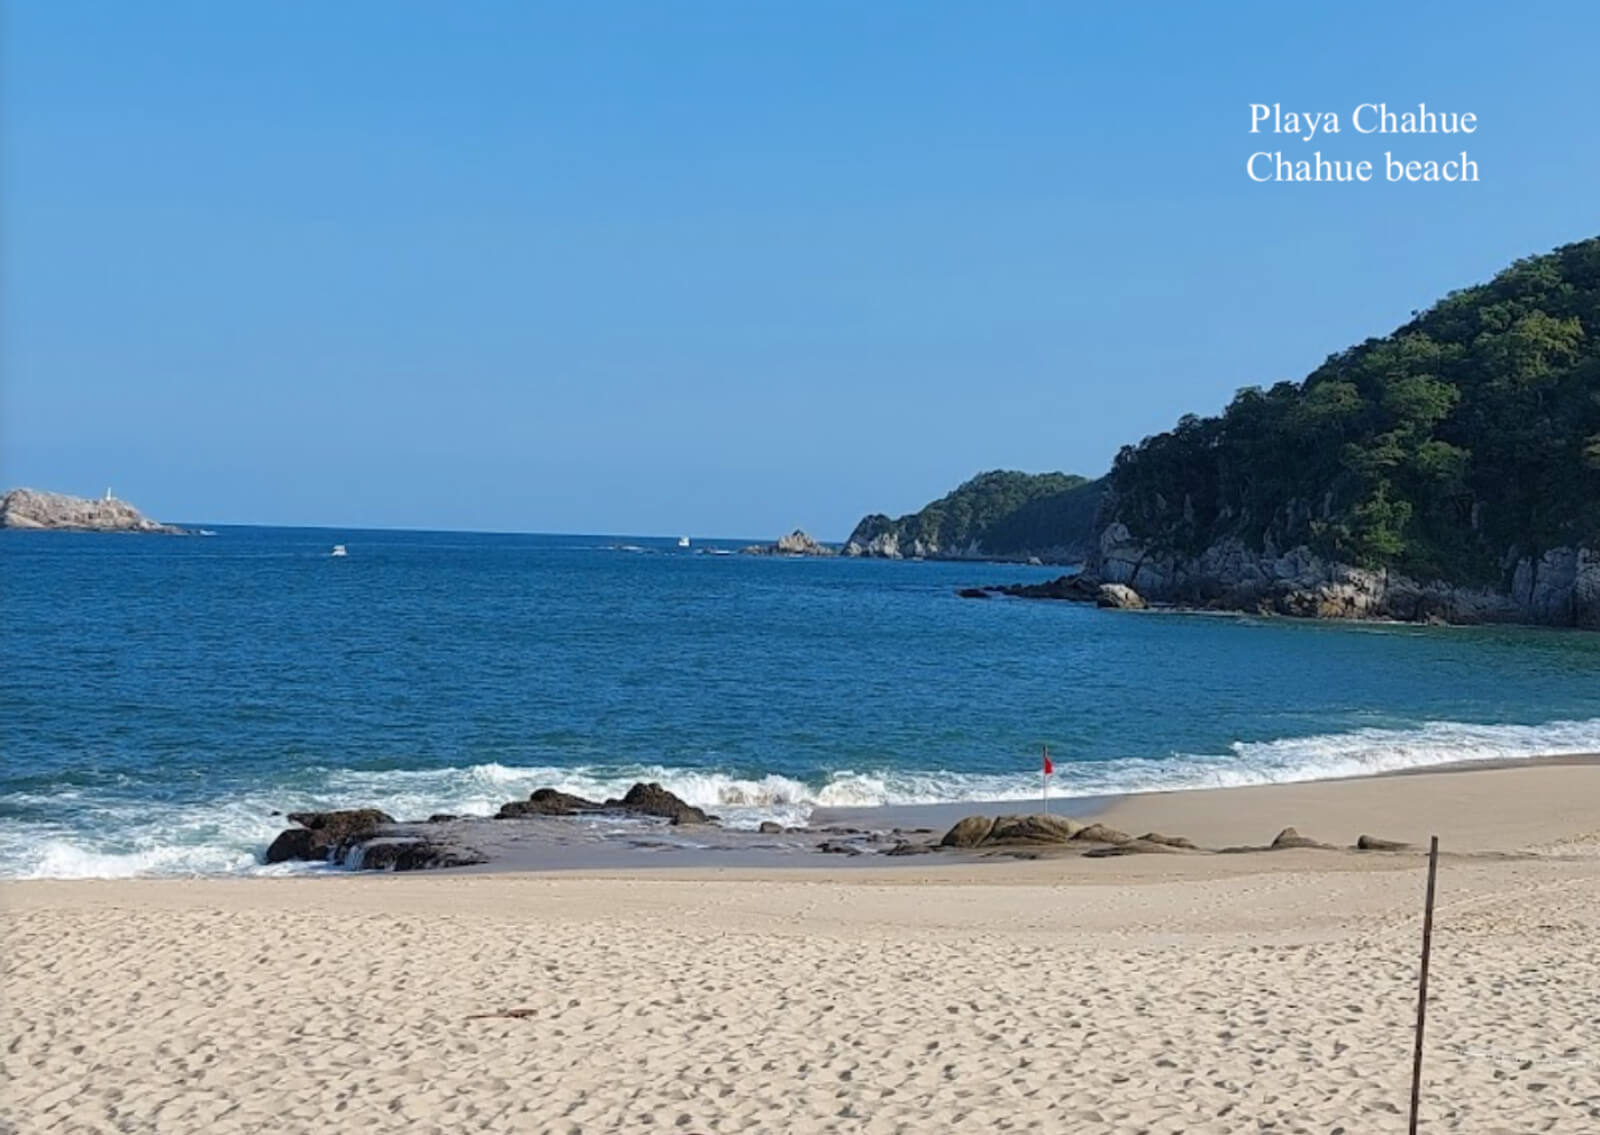 Land of 309 m2 in petite gated community, for sale in Huatulco.